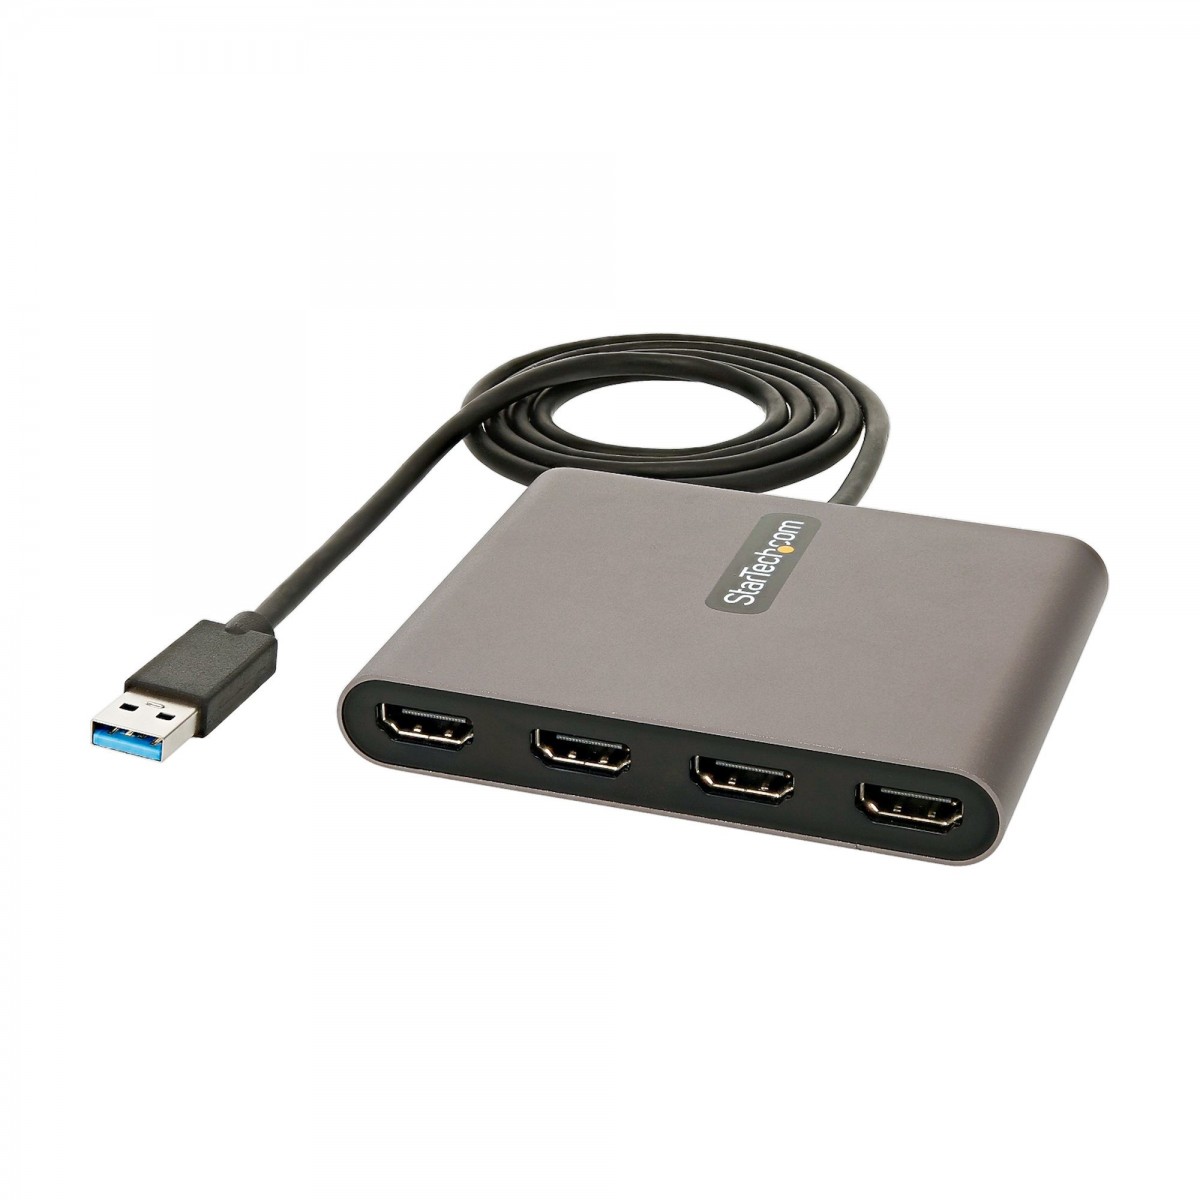 StarTech.com USB 3.0 TO 4 HDMI ADAPTER - Cable - Digital